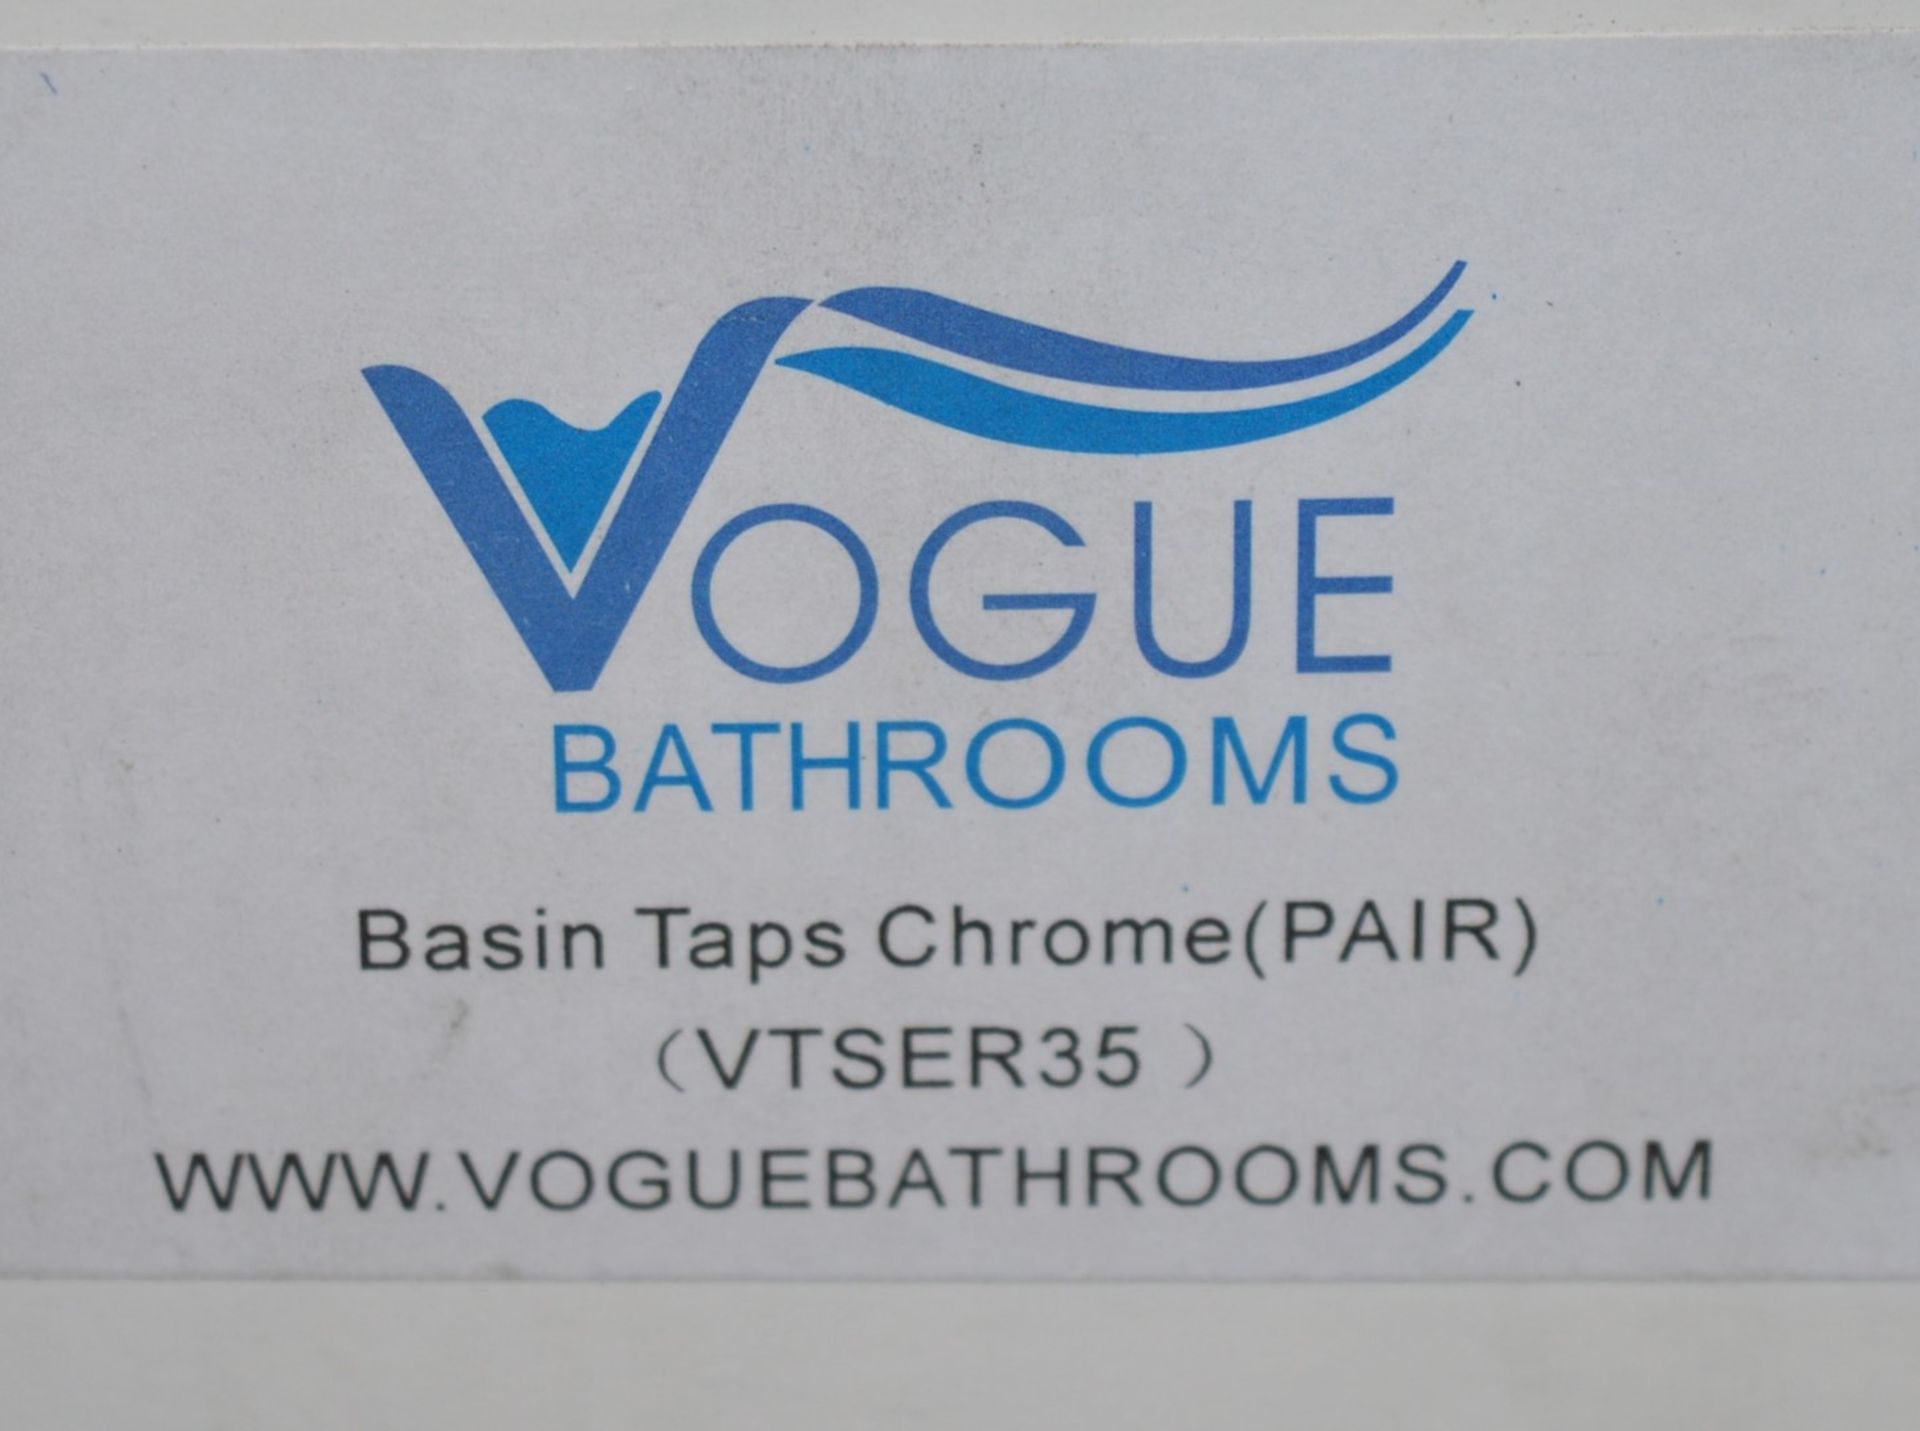 1 x Vogue Series 3 Sink Basin Taps in Chrome (Pair) - Modern Bath Mixer Tap in Bright Chrome - - Image 3 of 7